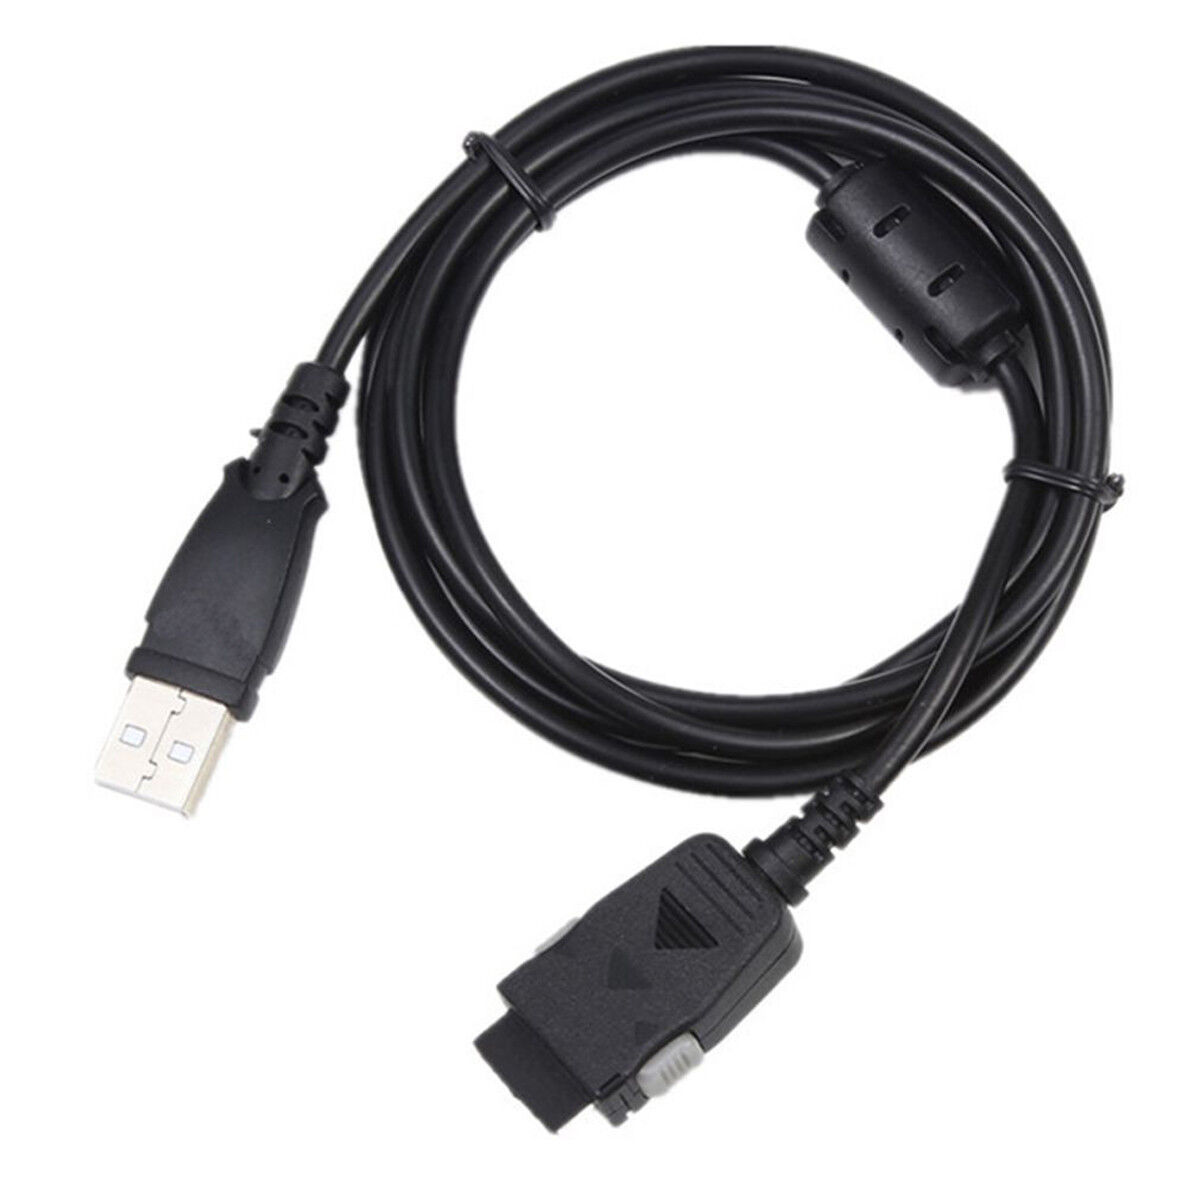 Primary image for Usb Pc Power Charger Data Sync Cable Cord For Samsung Yp-P2 J P2Q P2E Mp3 Player